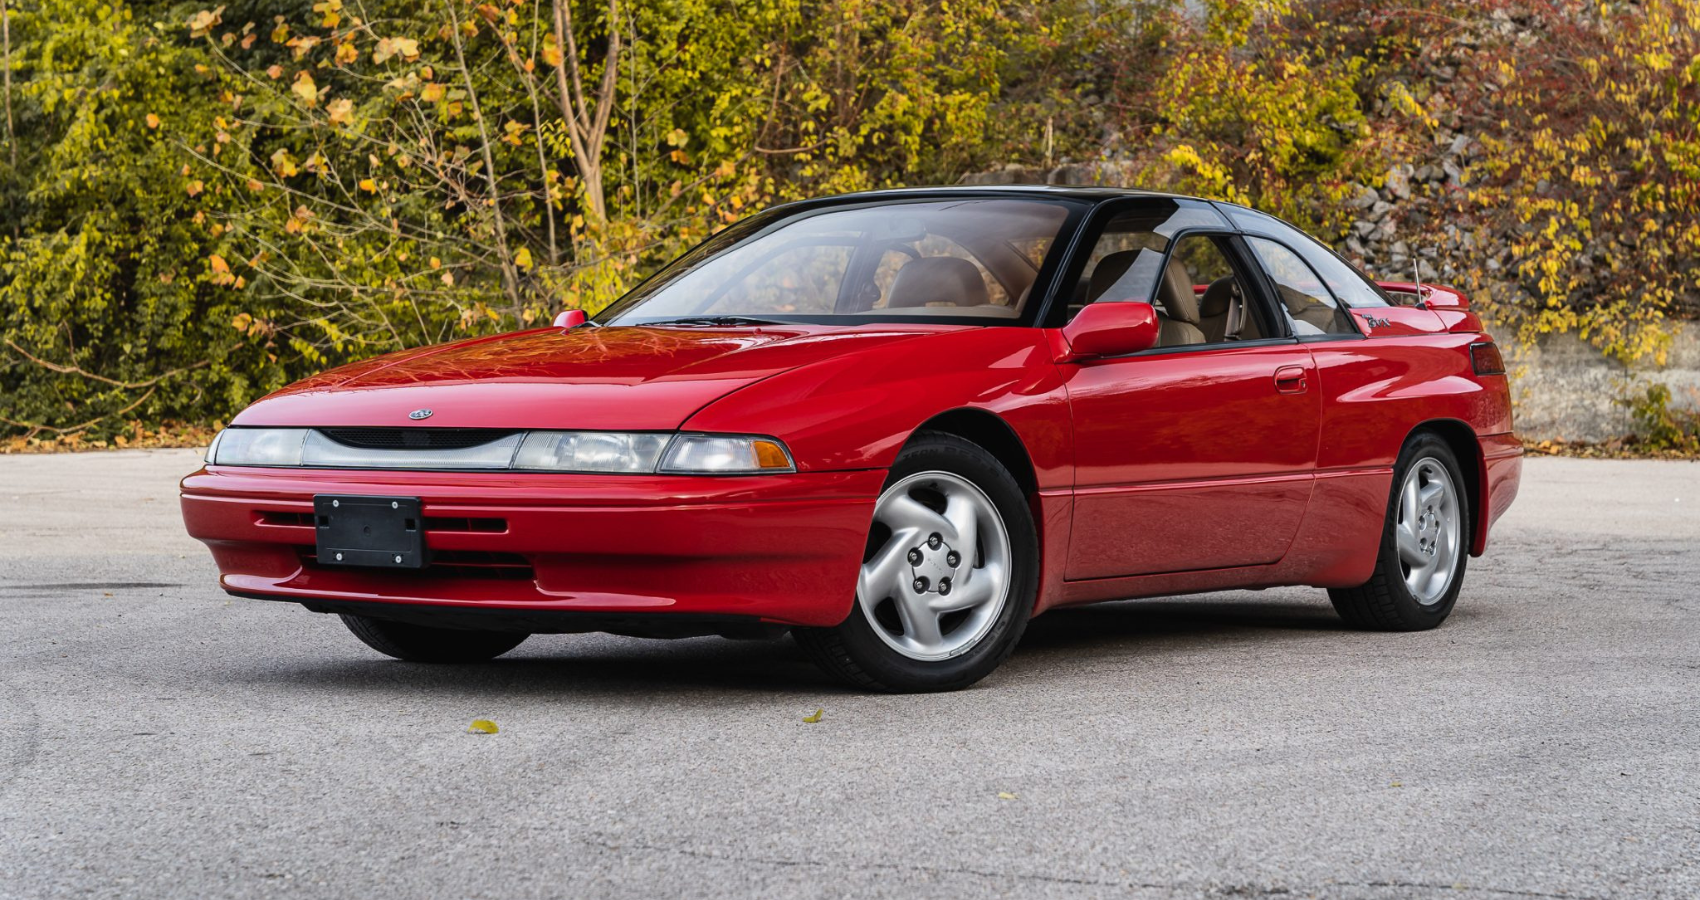 Red 1996 Subaru SVX front view